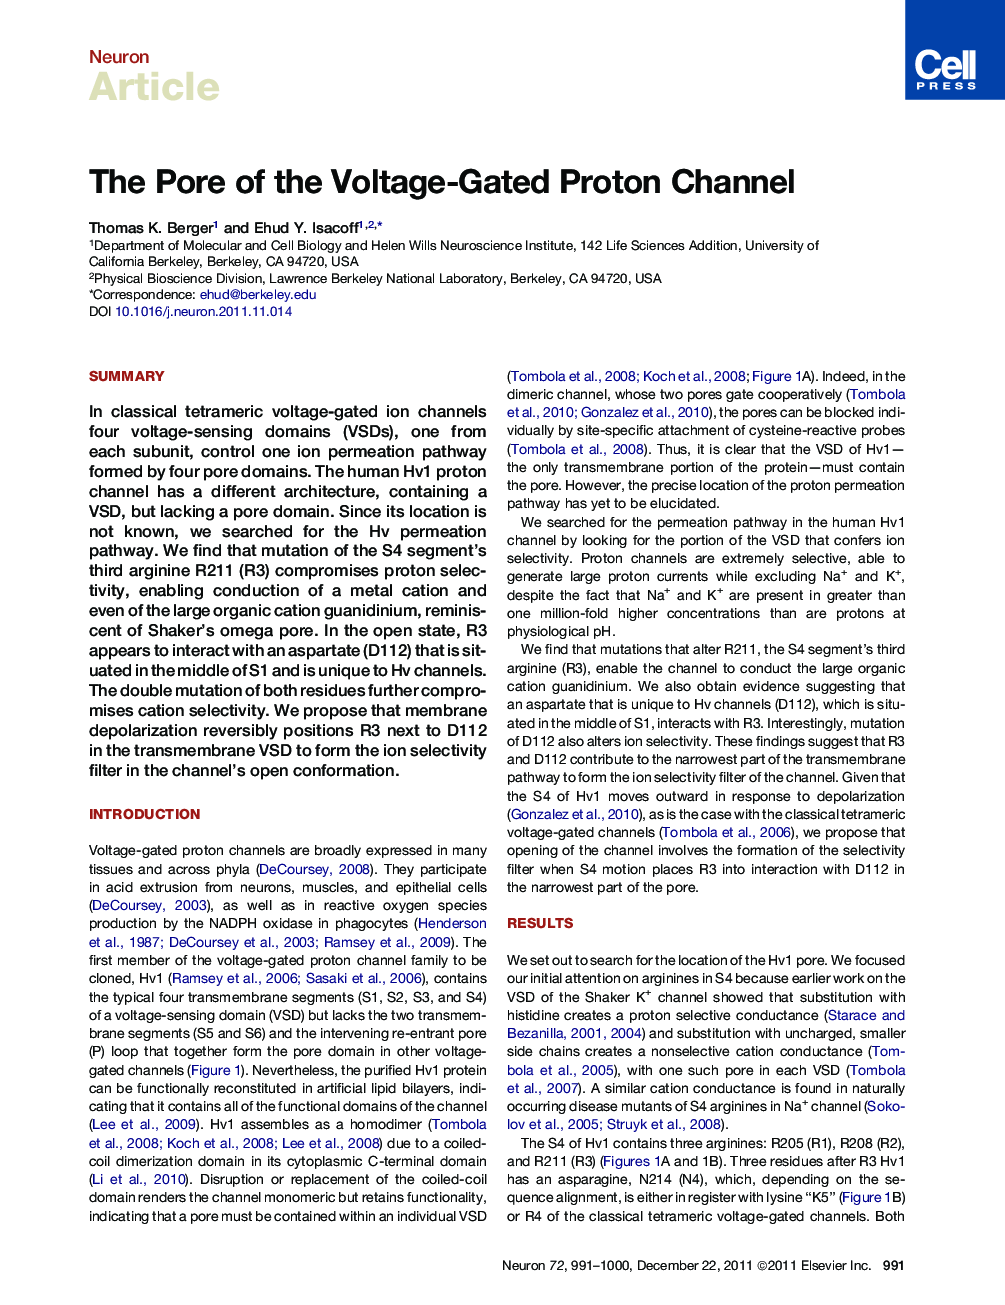 The Pore of the Voltage-Gated Proton Channel